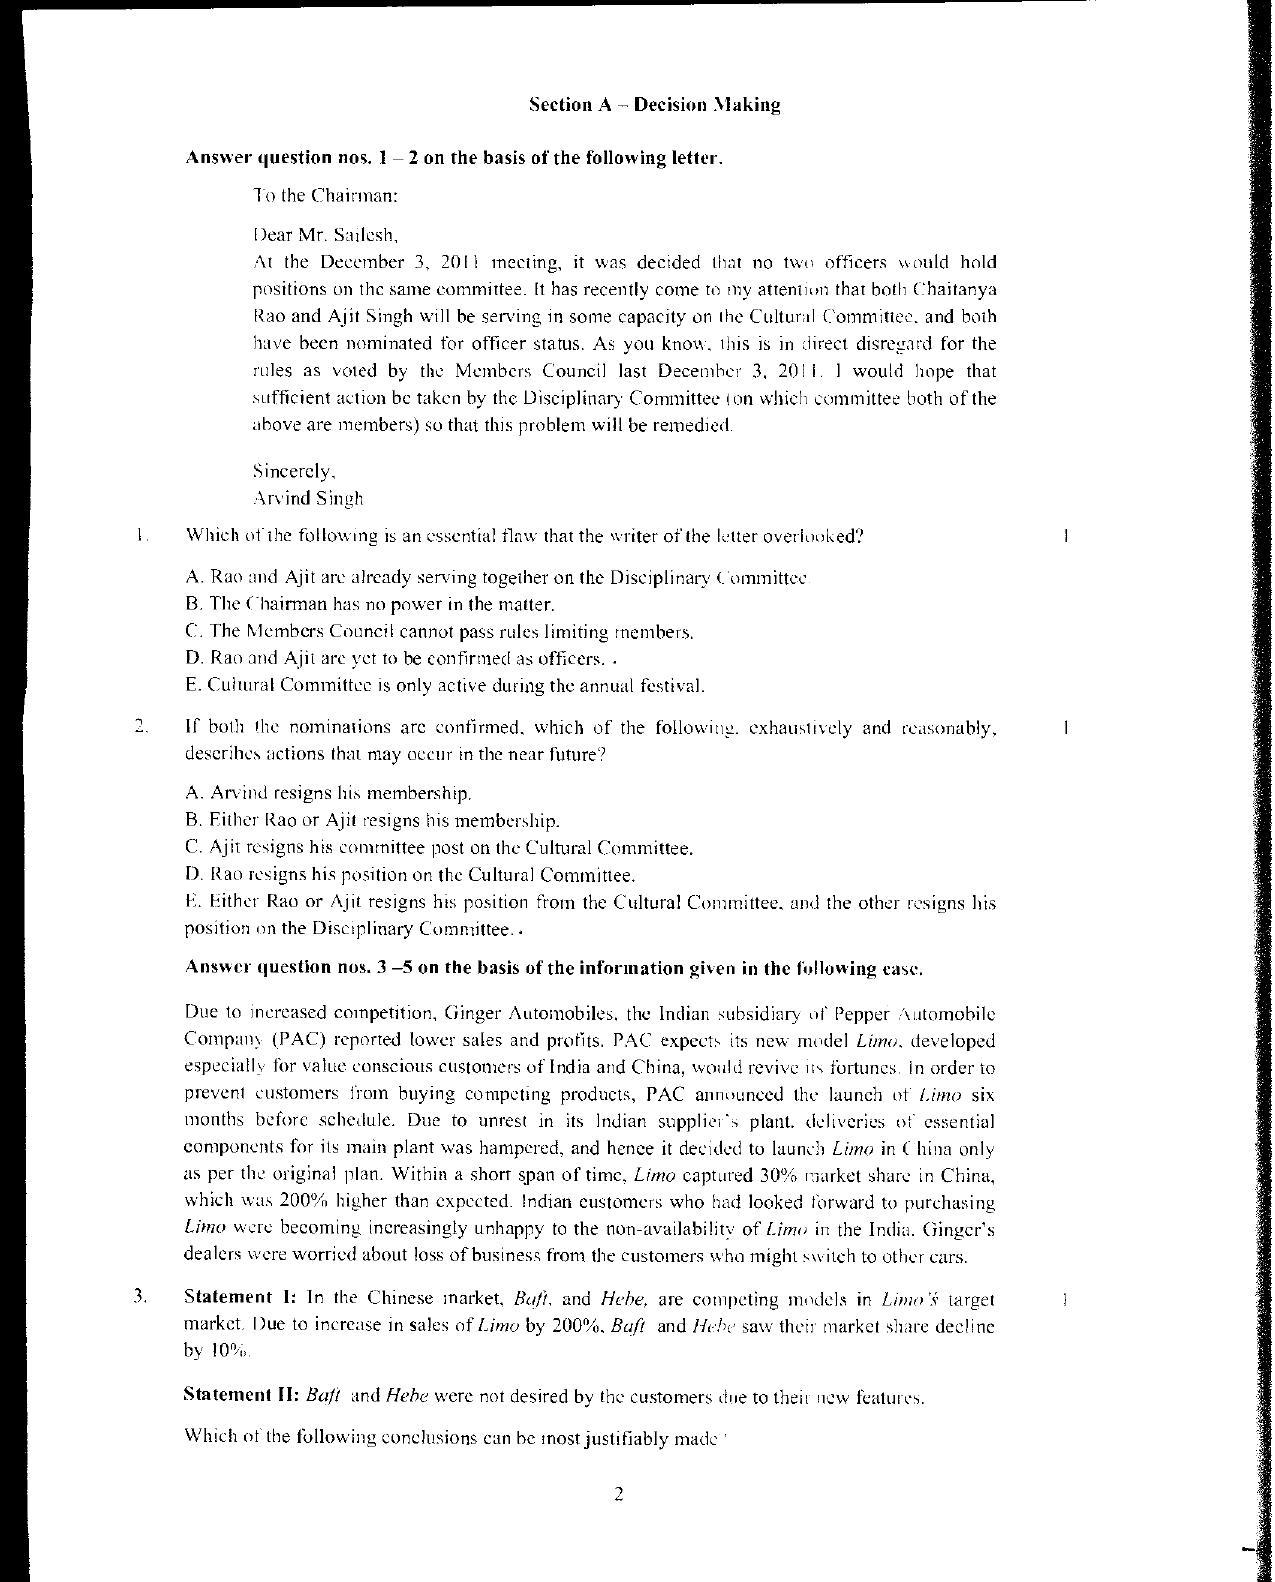 XAT 2012 Question Papers - Page 3